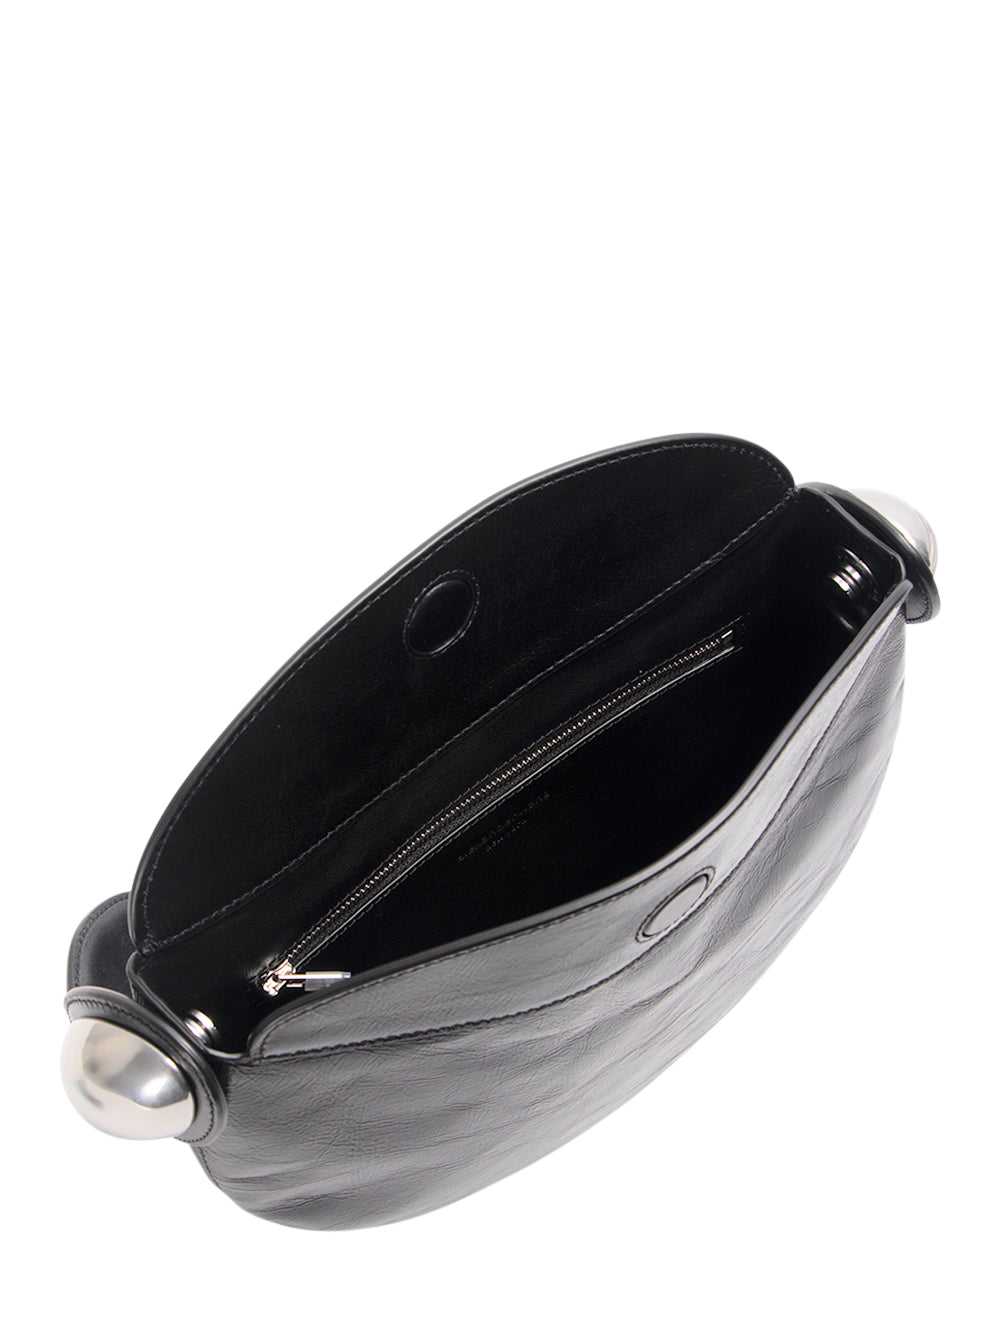 Dome-Crackle-Patent-Leather-Multi-Carry-Bag-Black-03